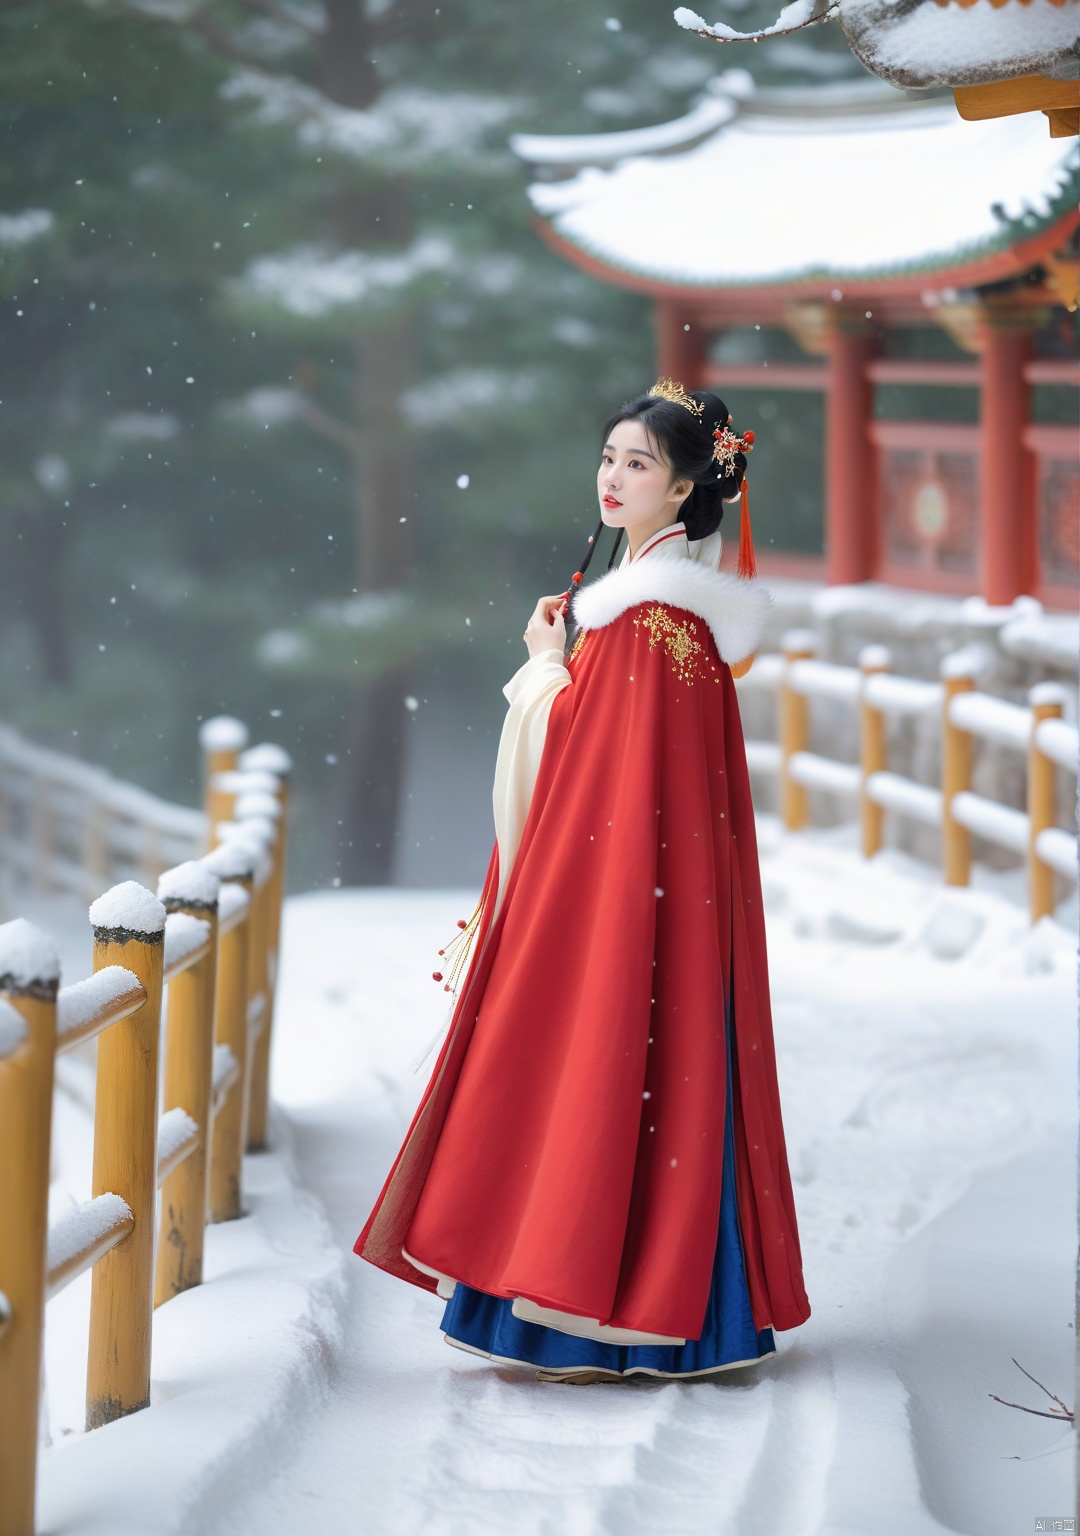  1girl,black hair,Beautiful face, Red cape,full body,Heavy snowfall, wearing Hanfu, on a secluded path, posing in various poses to take photos,outdoors,snow,snowing,solo,winter,Master lens, golden ratio composition, (Canon 200mm f2.8L) shooting, large aperture, background blur.,